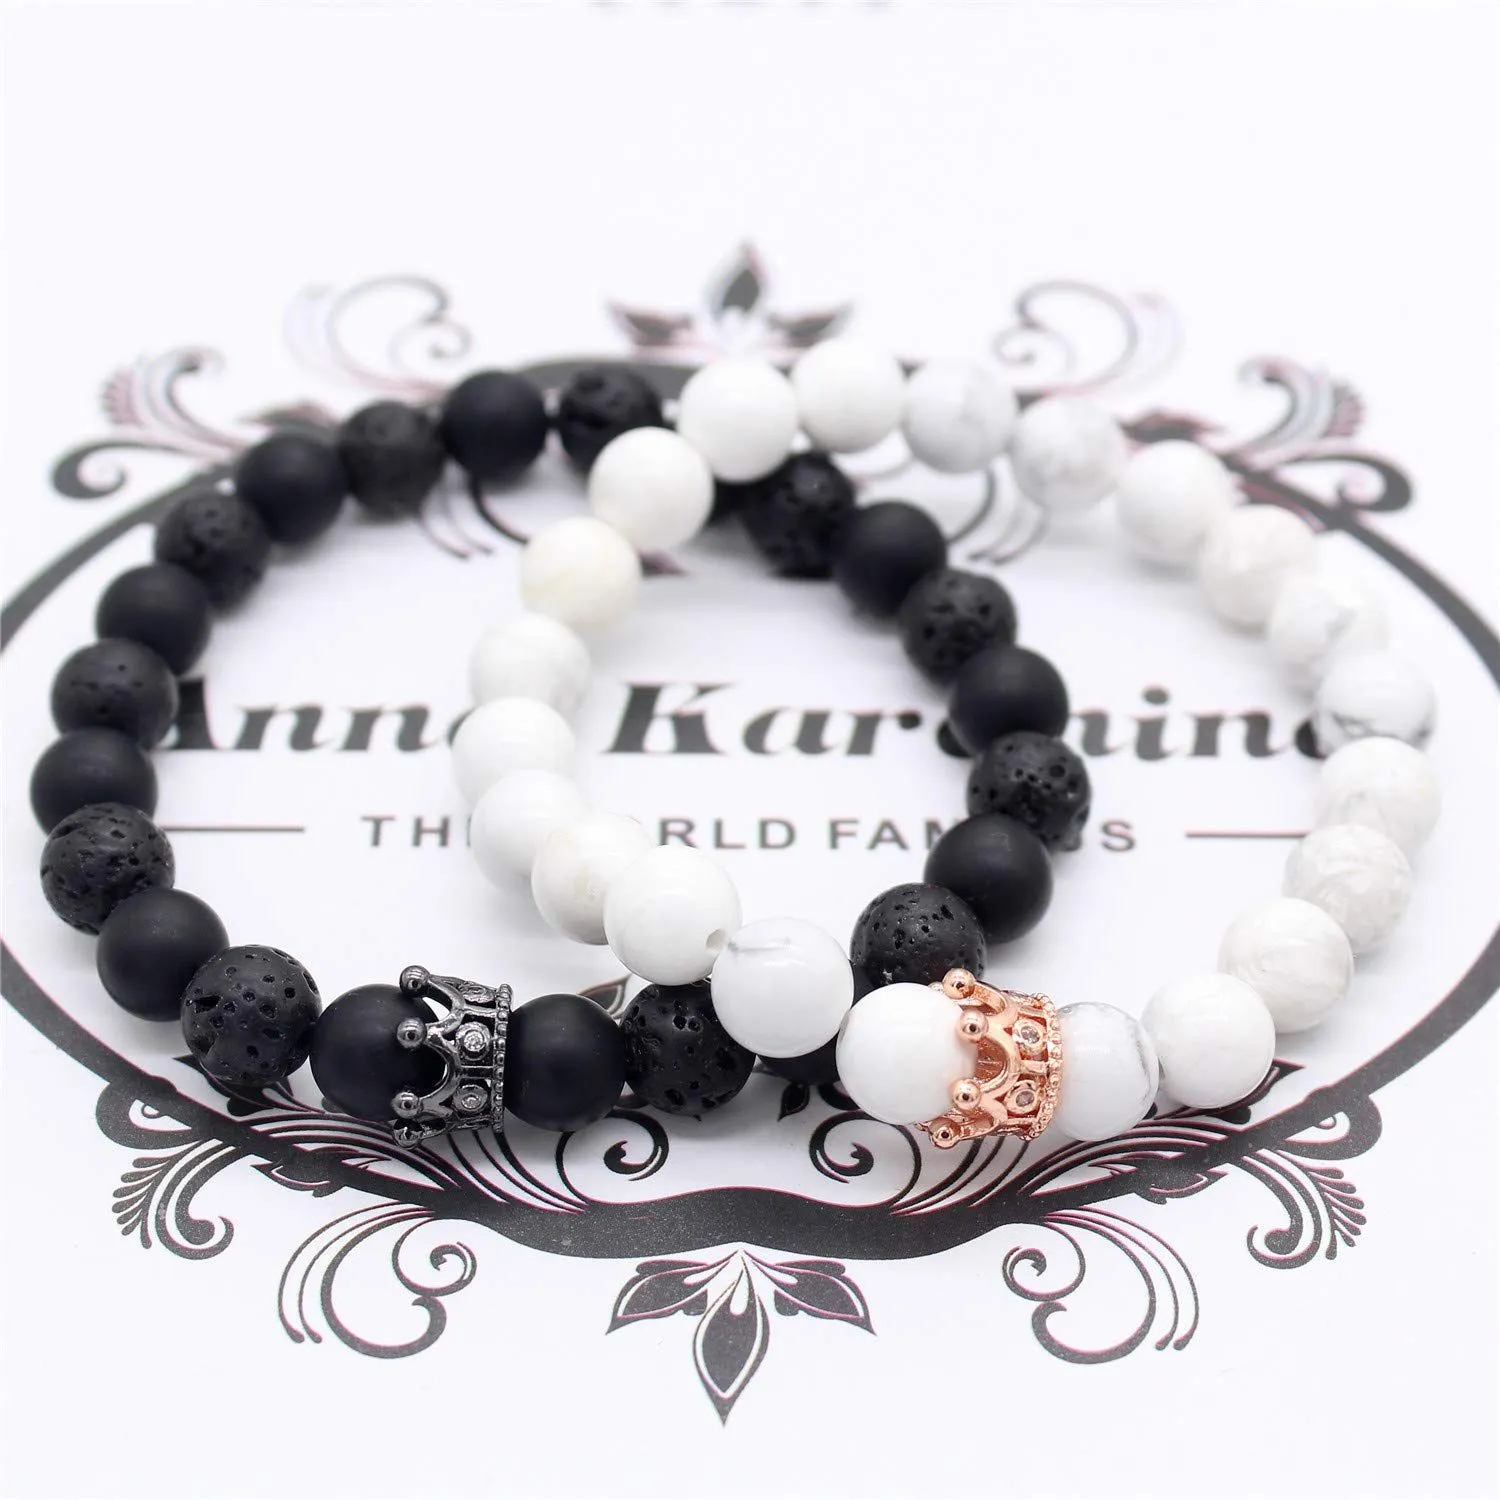 8mm Natural Stone Strands Bracelets CZ Micro Pave Crown King Queen Beads His and Her Couple Bracelet